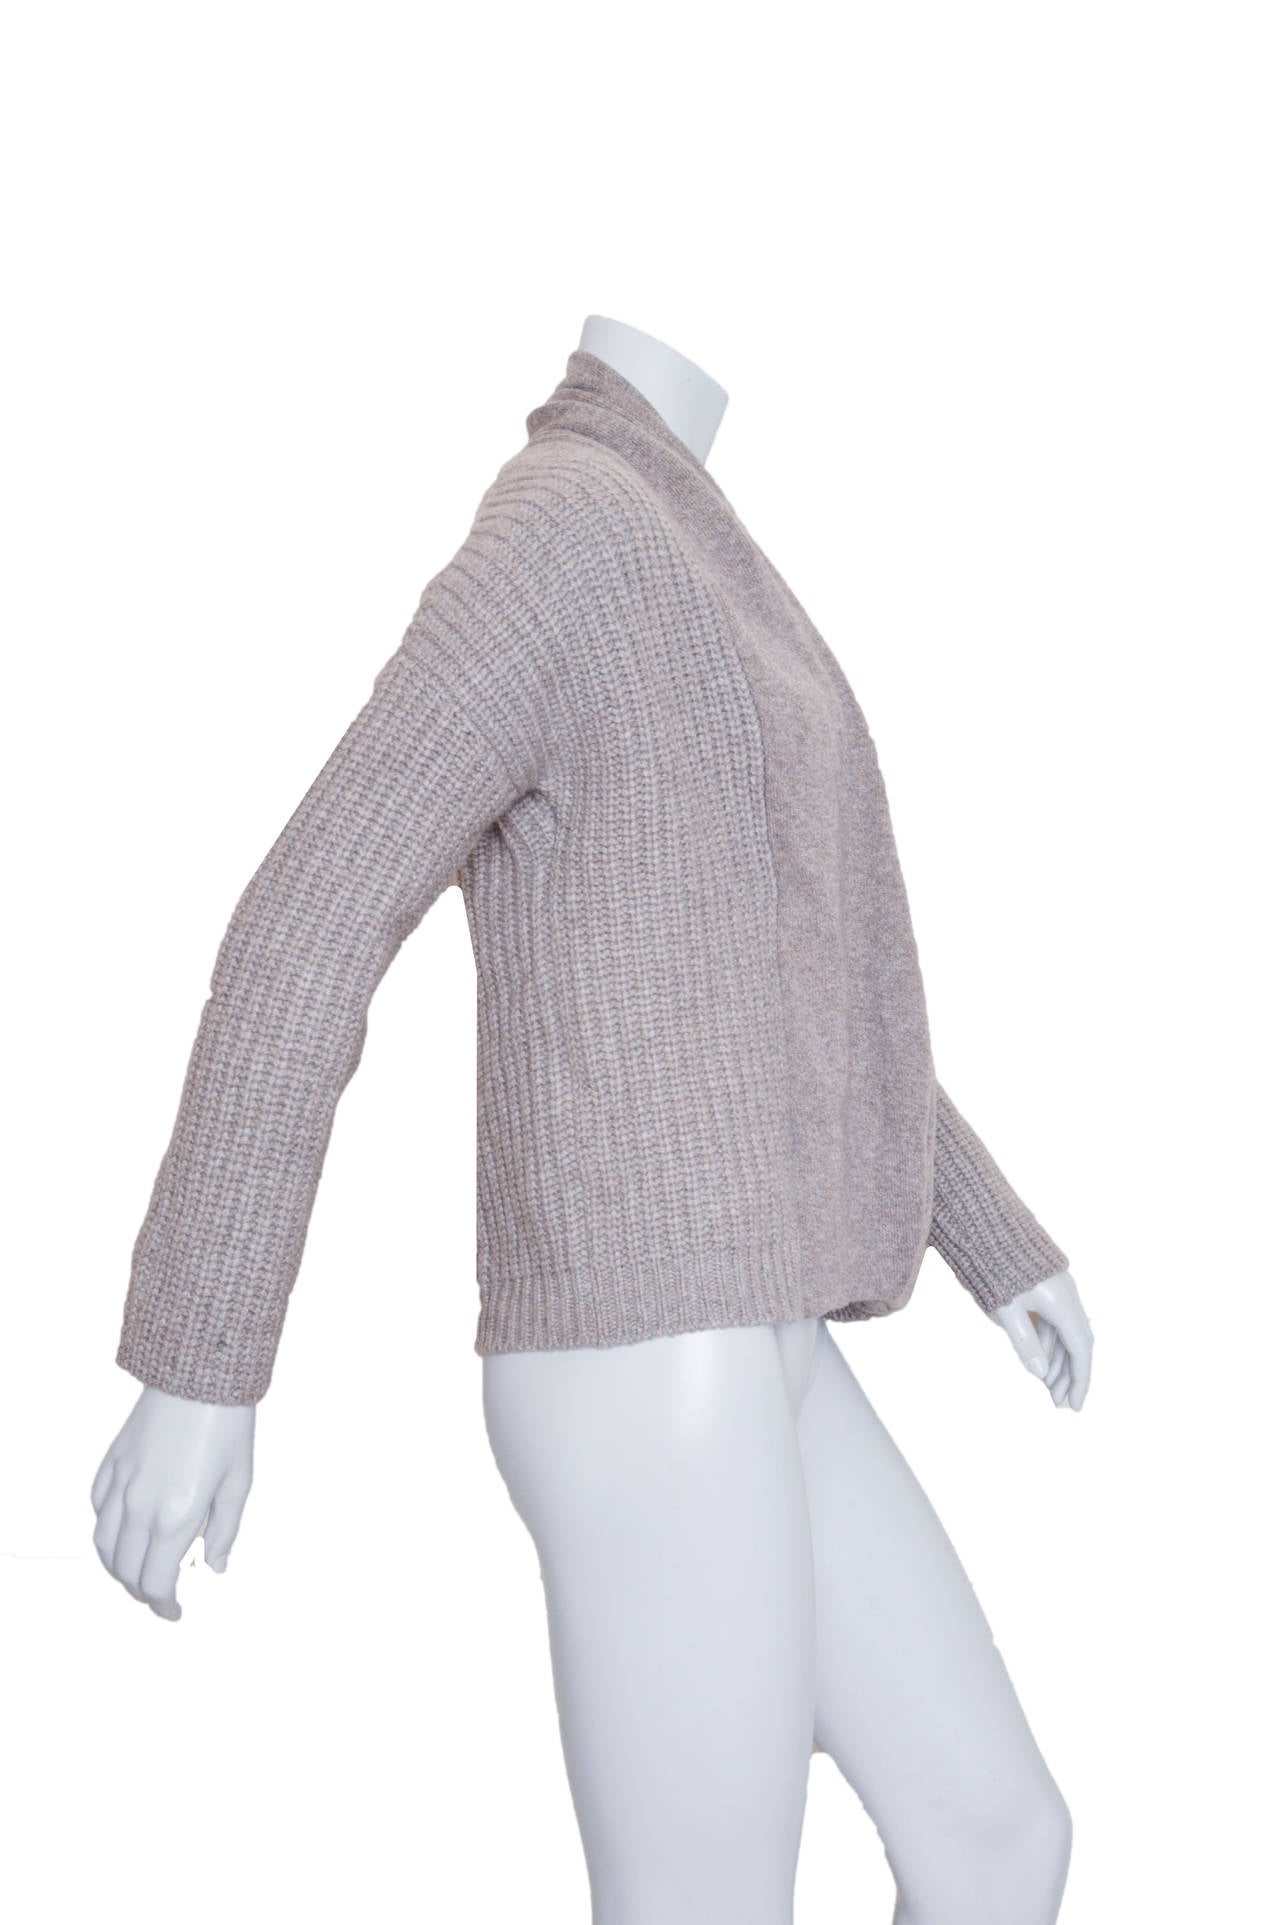 Sumptuous Brunello Cucinelli cable knit cashmere sweater.
Gray with metallic gold speckles.
Exaggerated shoulder, plunging crossover draped neckline.
Secured with button closure.
Tagged a US medium.